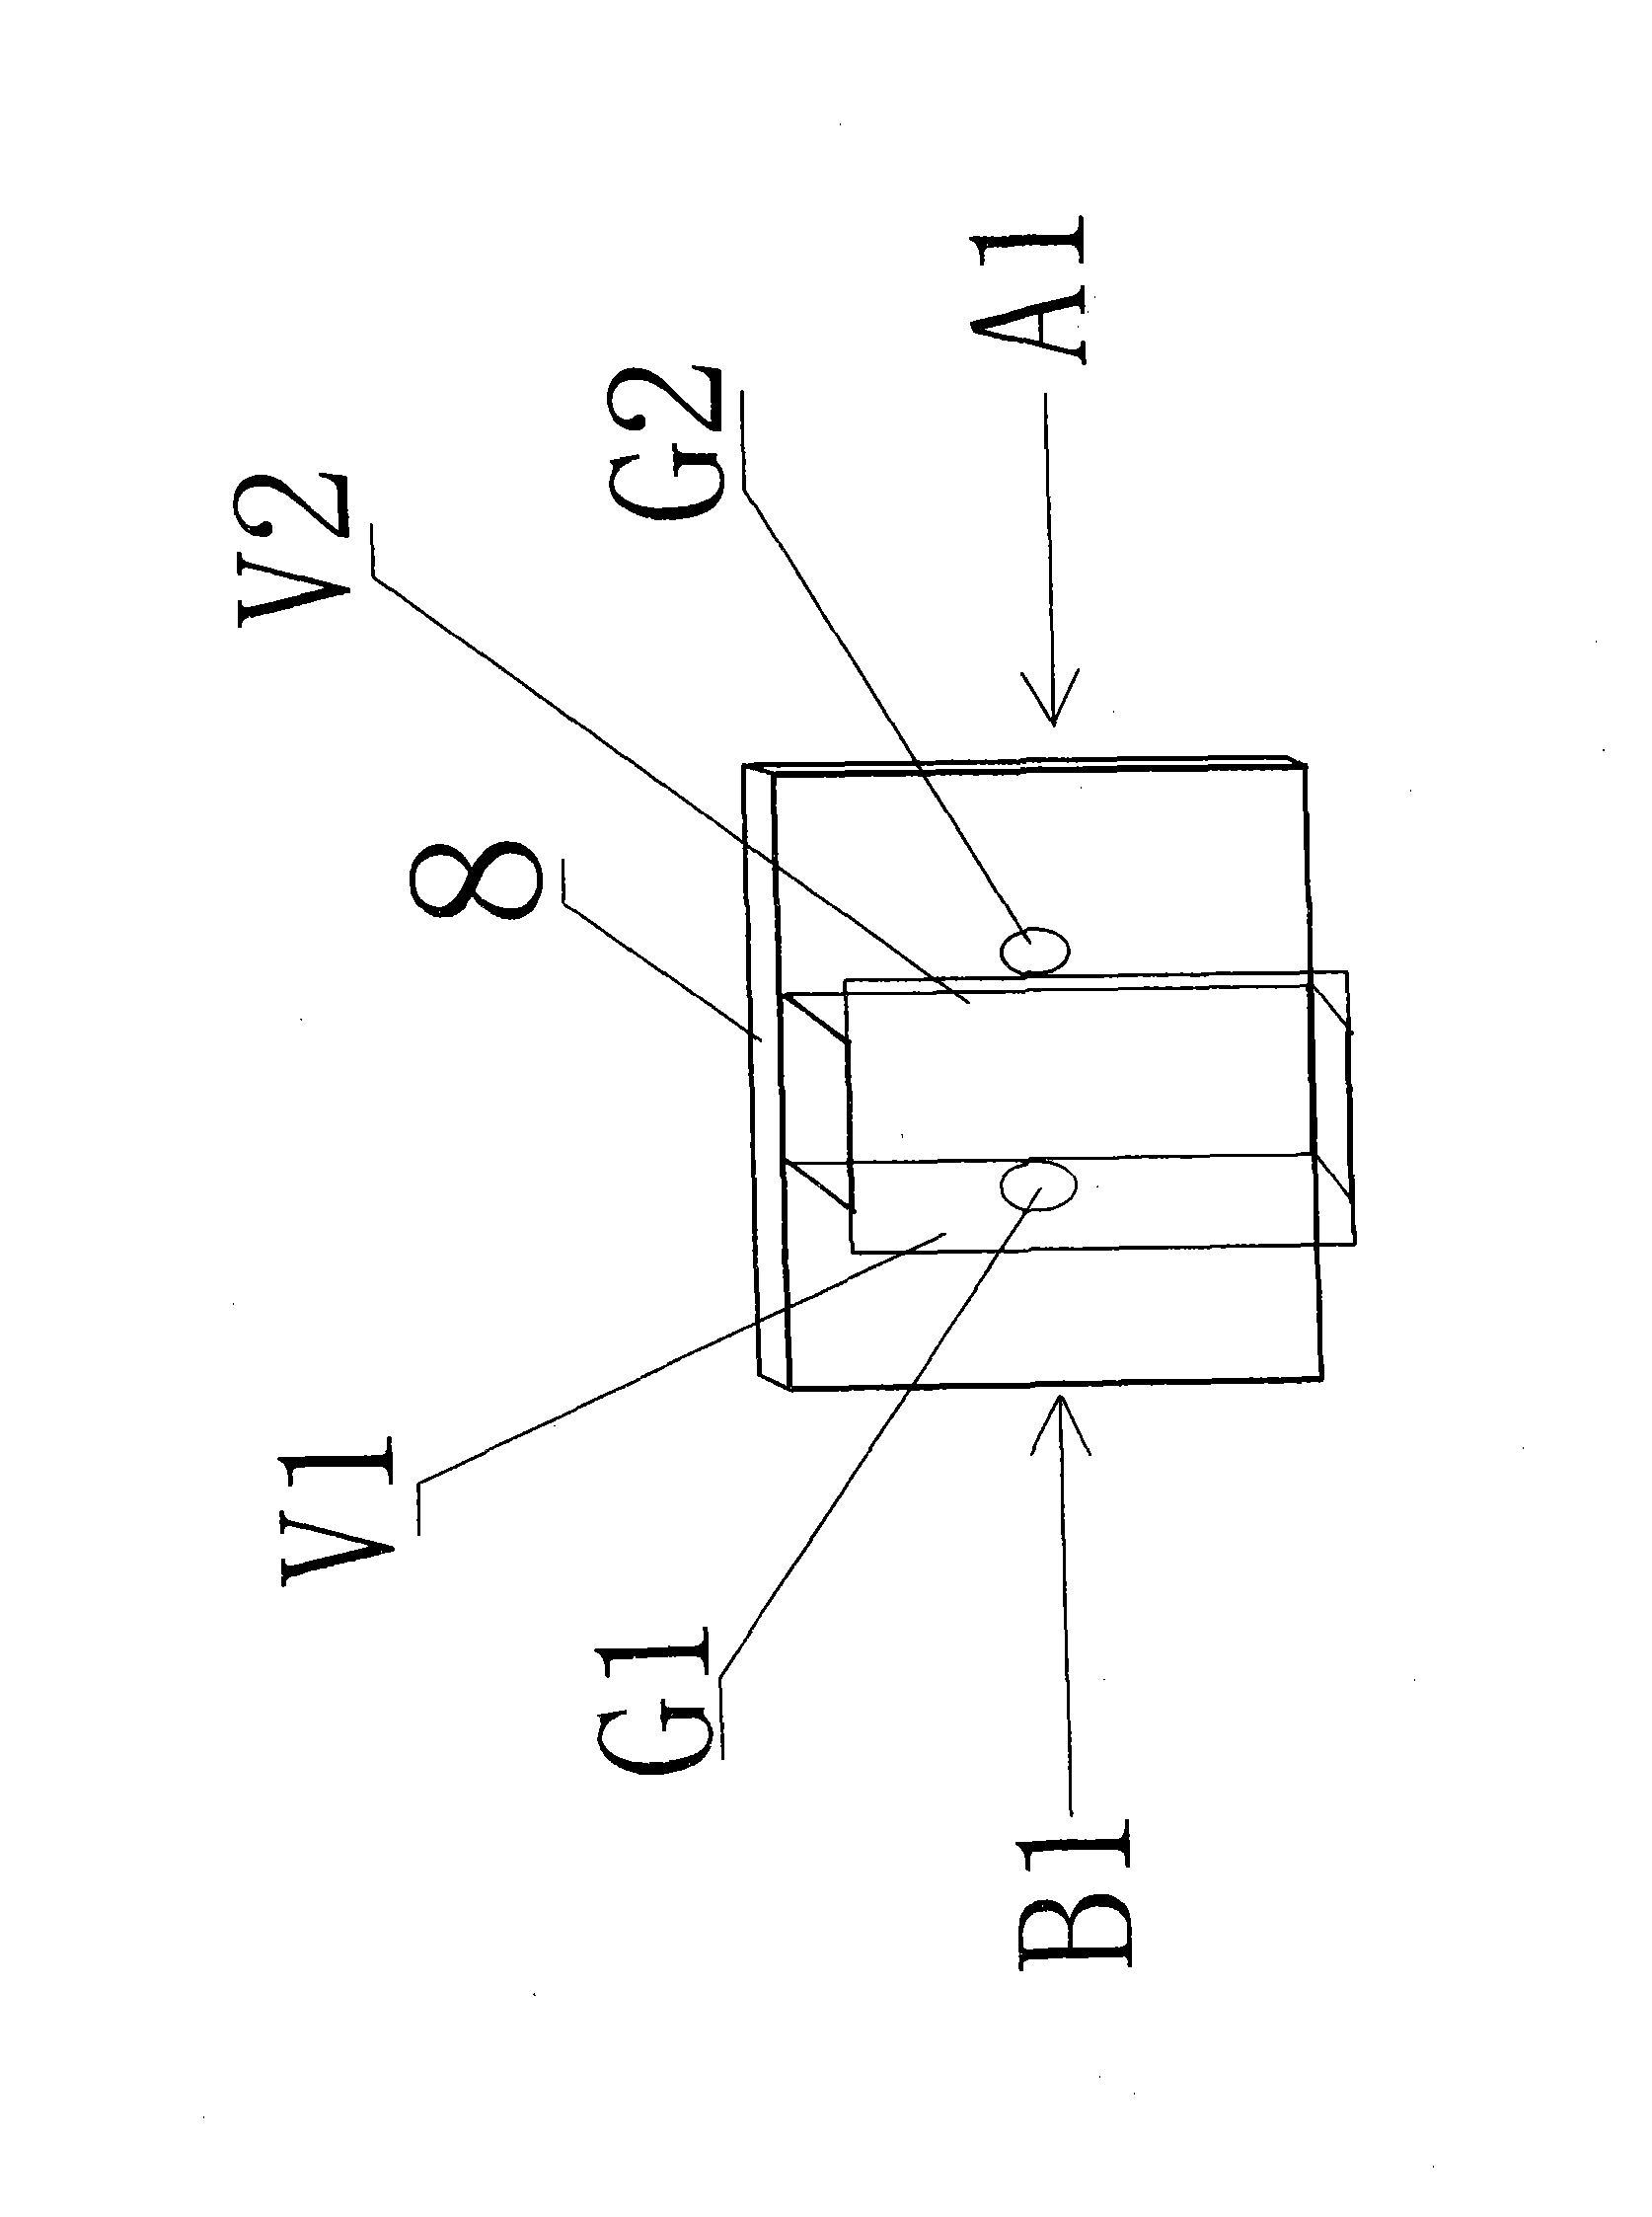 Tracking and aiming control method and device for heliostat